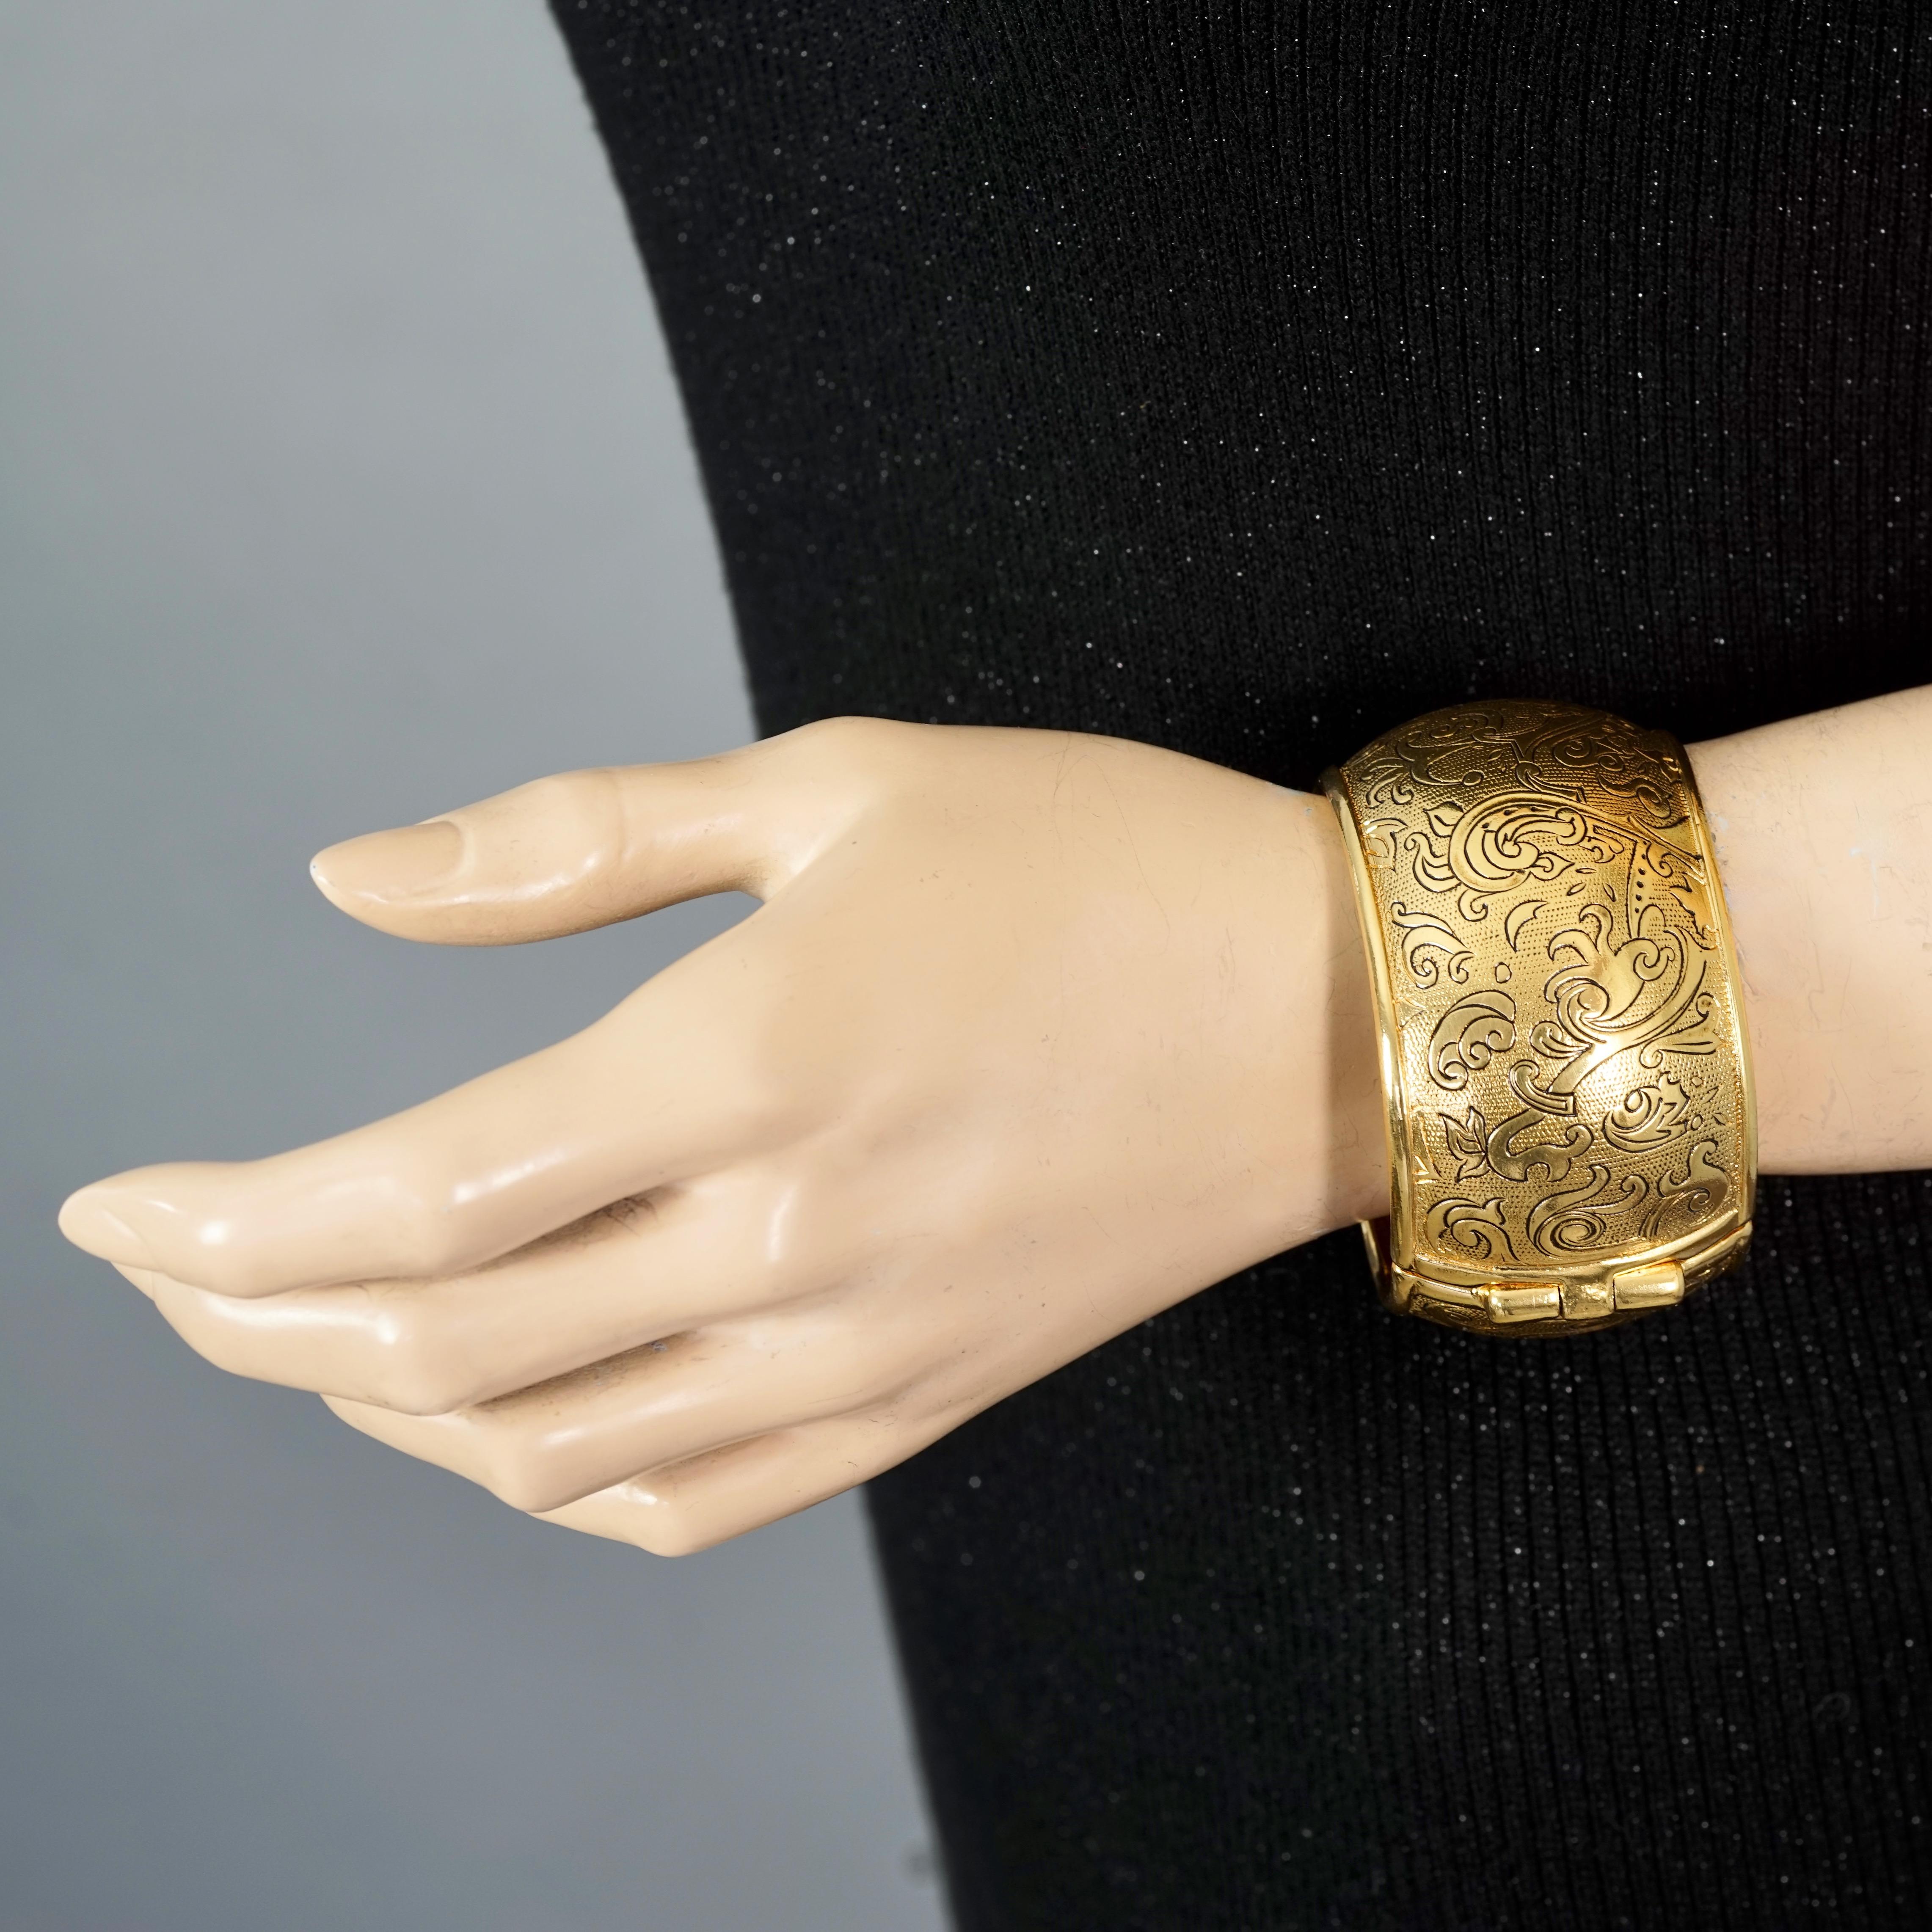 Vintage YVES SAINT LAURENT Ysl Arabesque Textured Cuff Bracelet

Measurements:
Height: 1.65 inches (4.2 cm)
Circumference: 6.88 inches (17.5 cm)

Features:
- 100% Authentic YVES SAINT LAURENT.
- Arabesque engraved pattern in black.
- Gold tone